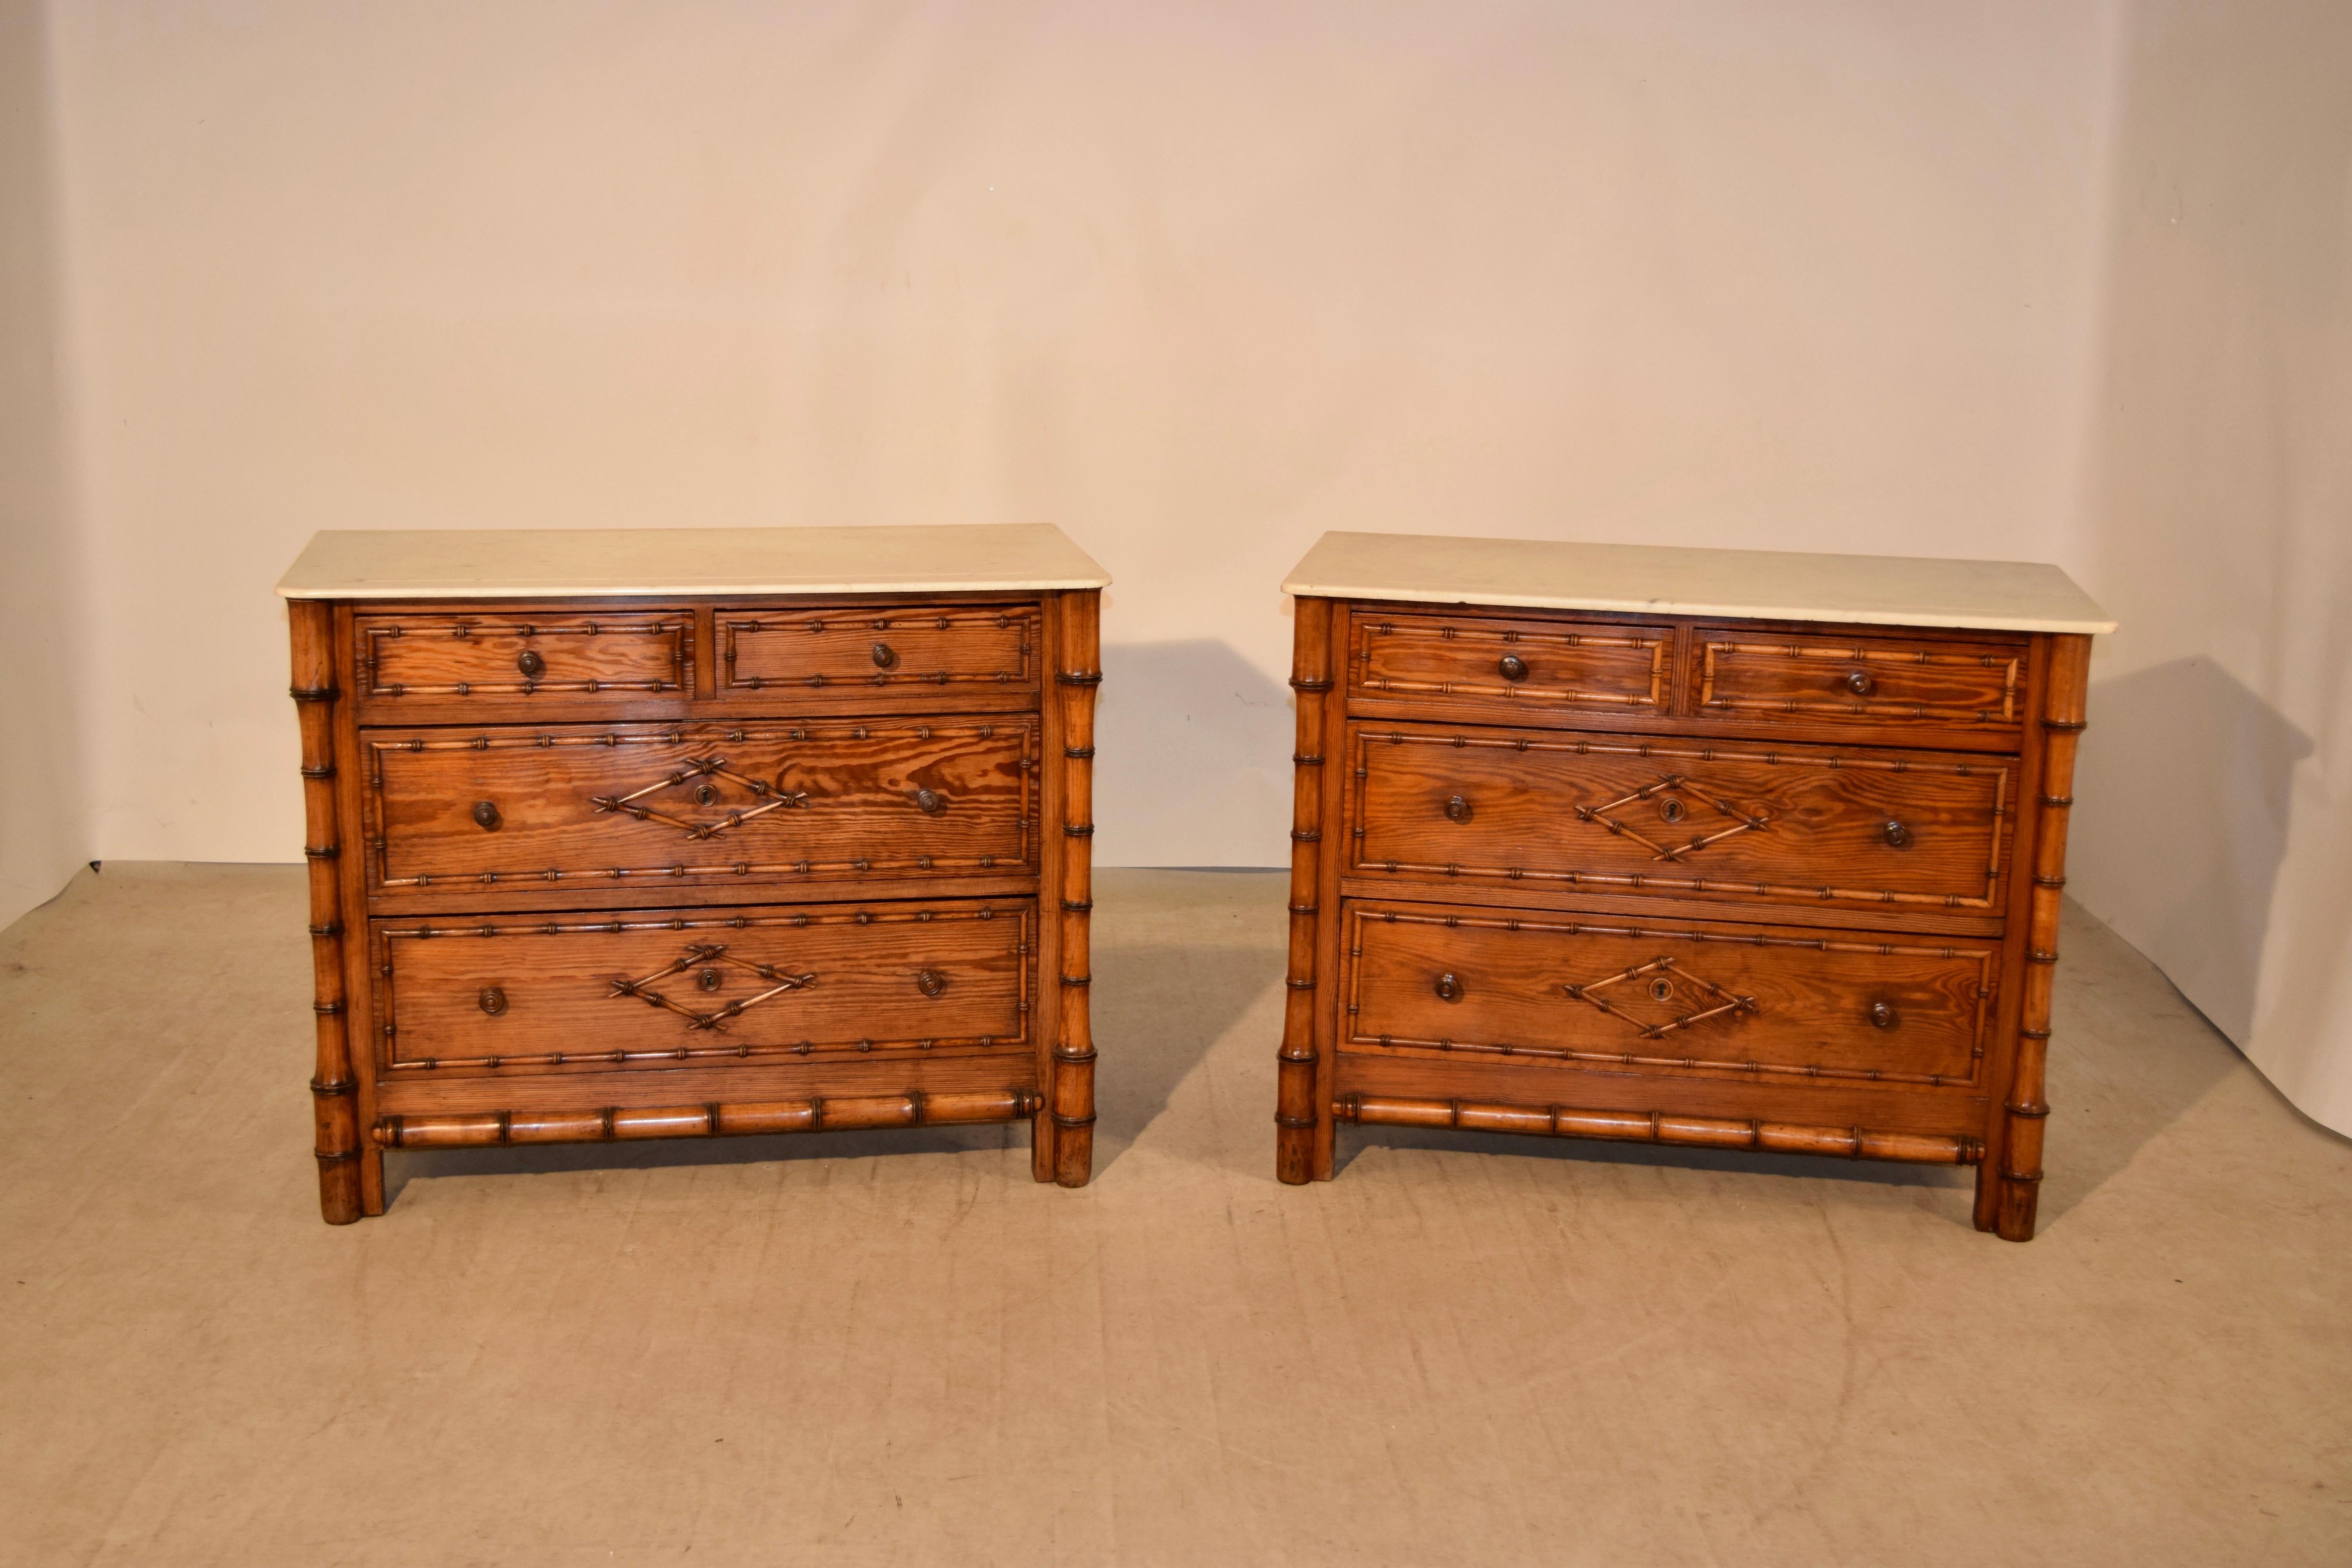 Pair of 19th century chests of drawers with faux bamboo decoration from France. The tops are made from marble, following down to cases made from cherry and pitch pine. They have two smaller drawers over two larger drawers and the drawer fronts are